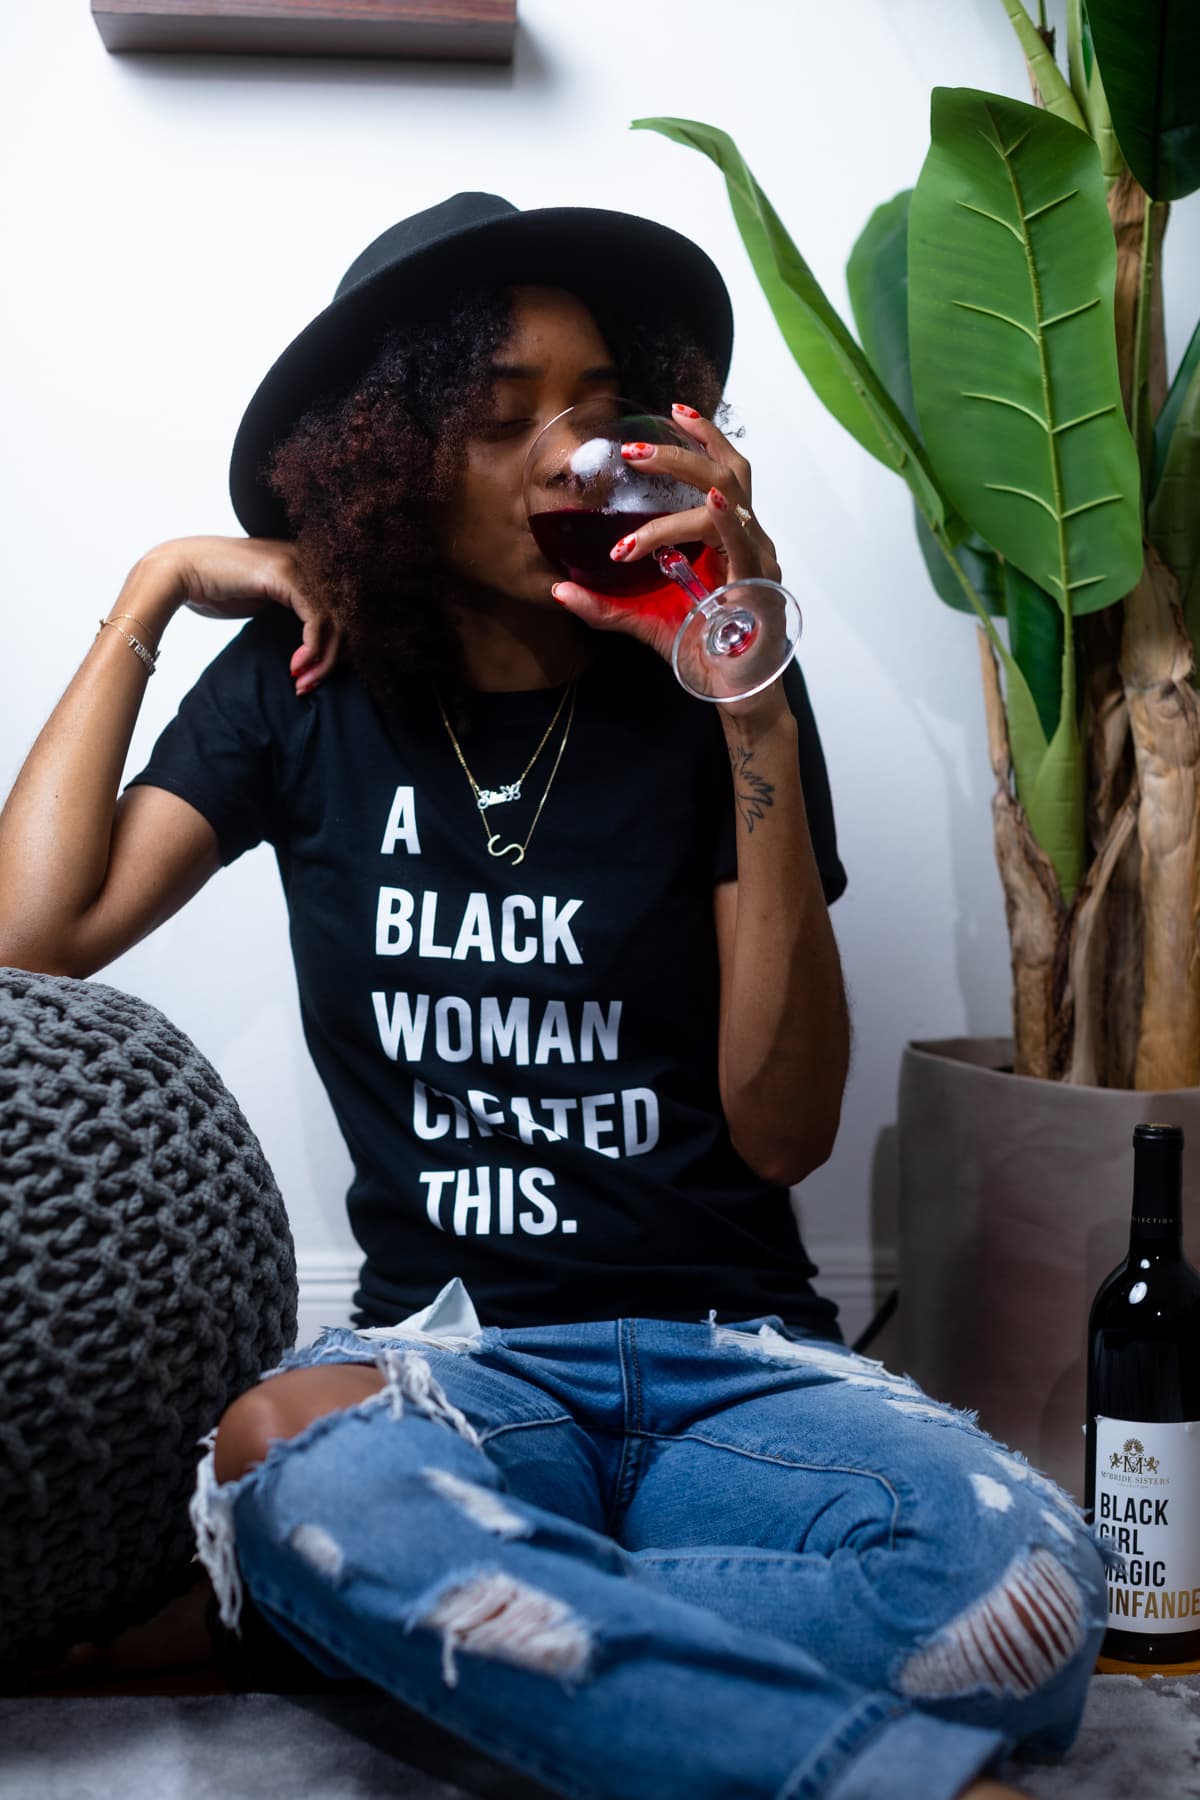 Shanika drinking Black Girl Magic wine while wearing a shirt that says \"A Black Woman Created This\"